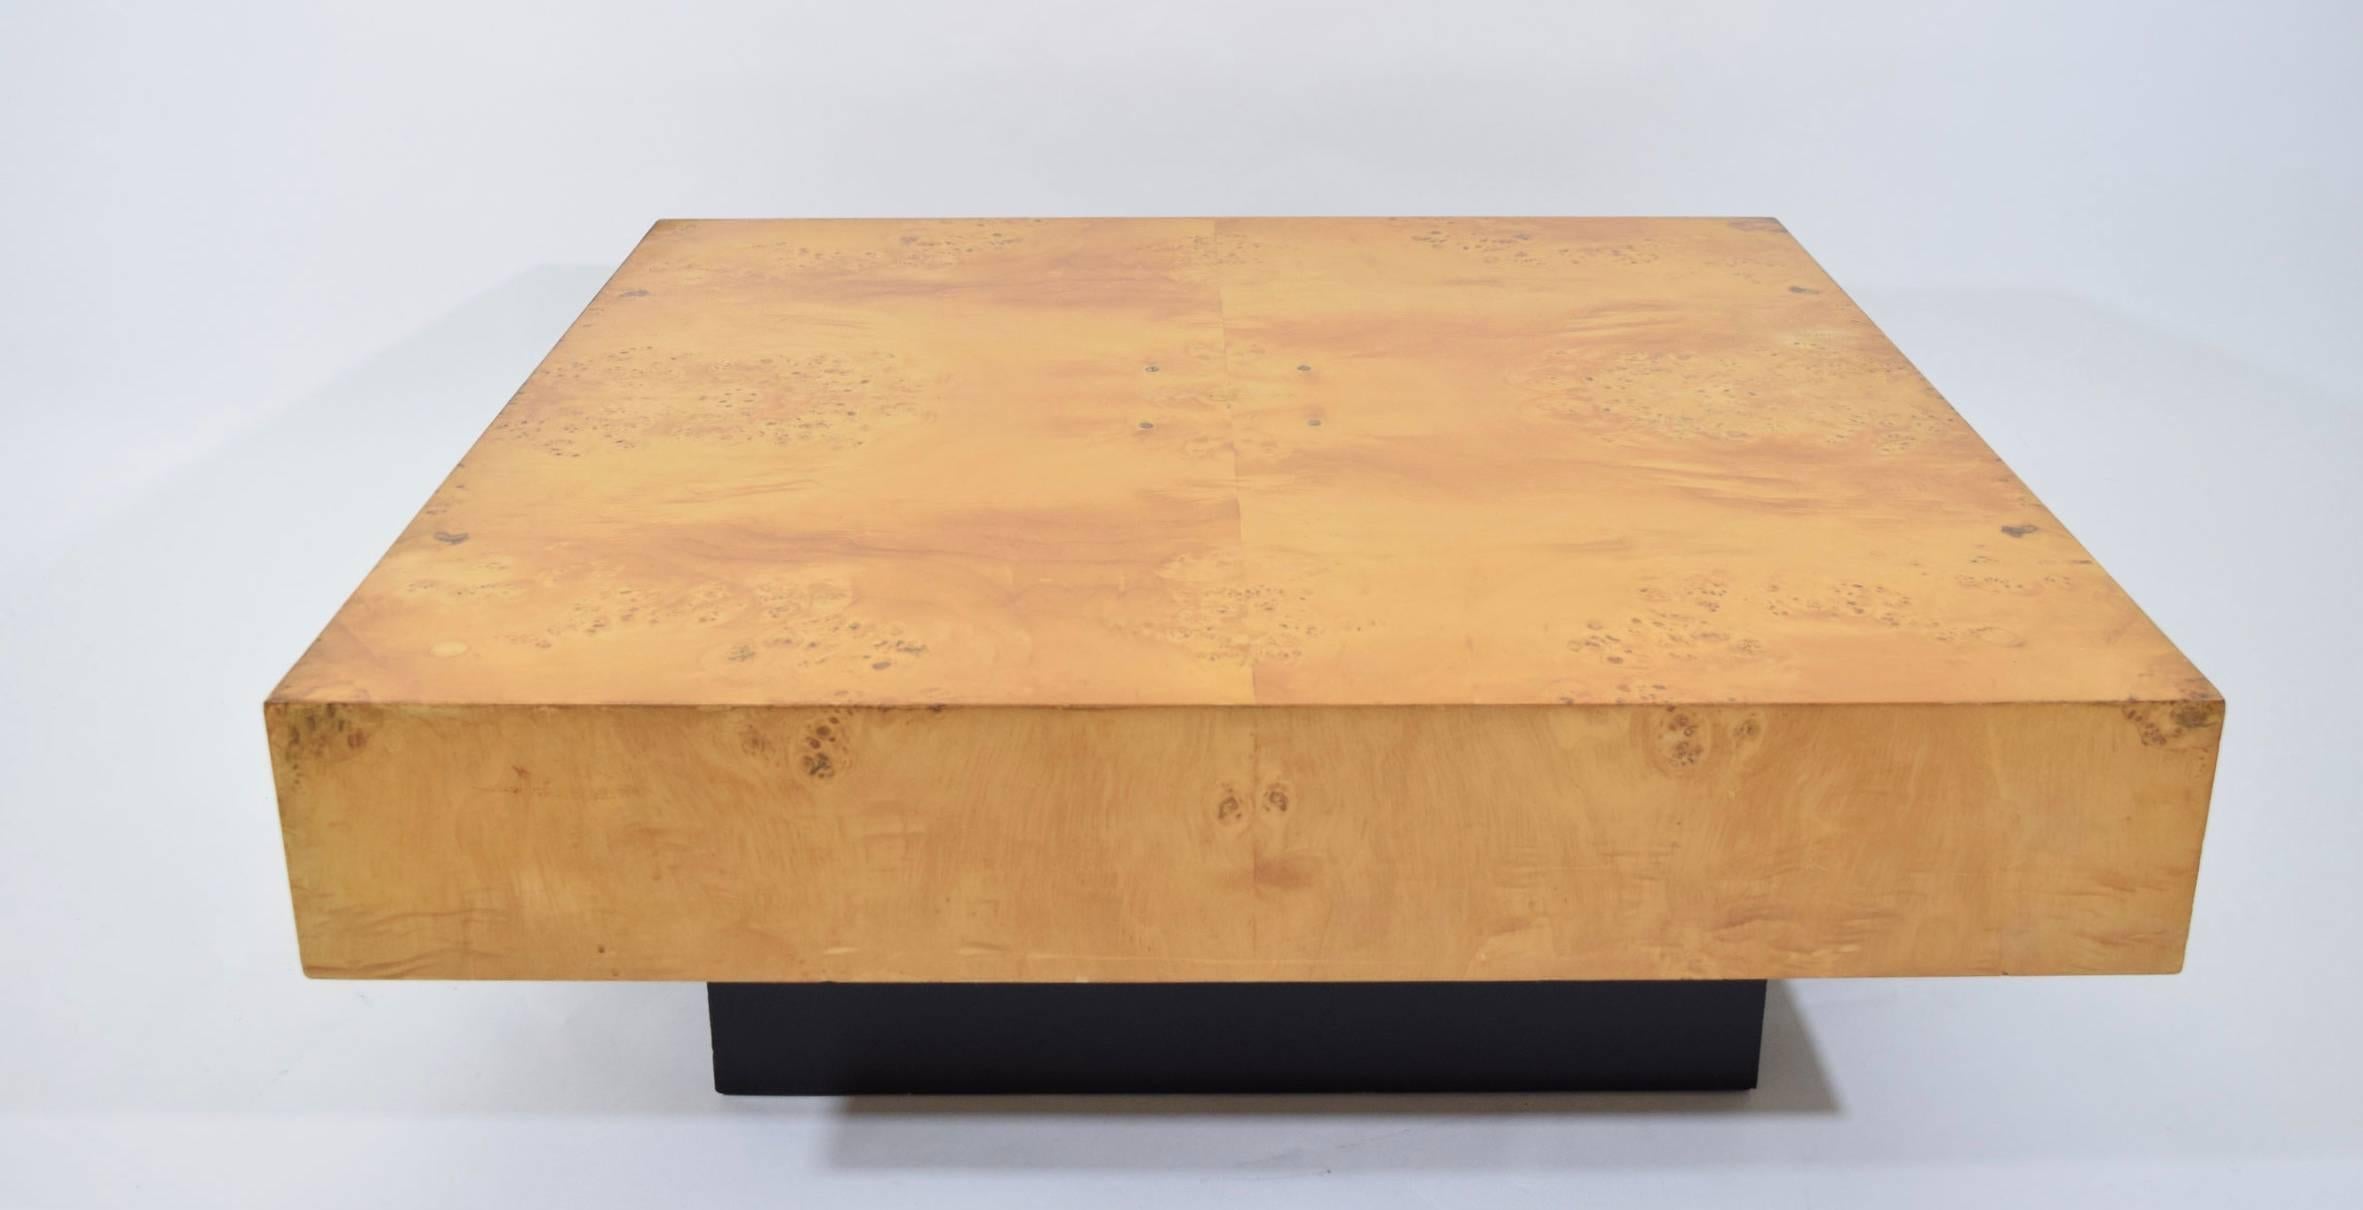 Solid burl wood coffee table on black base by Milo Baughman.